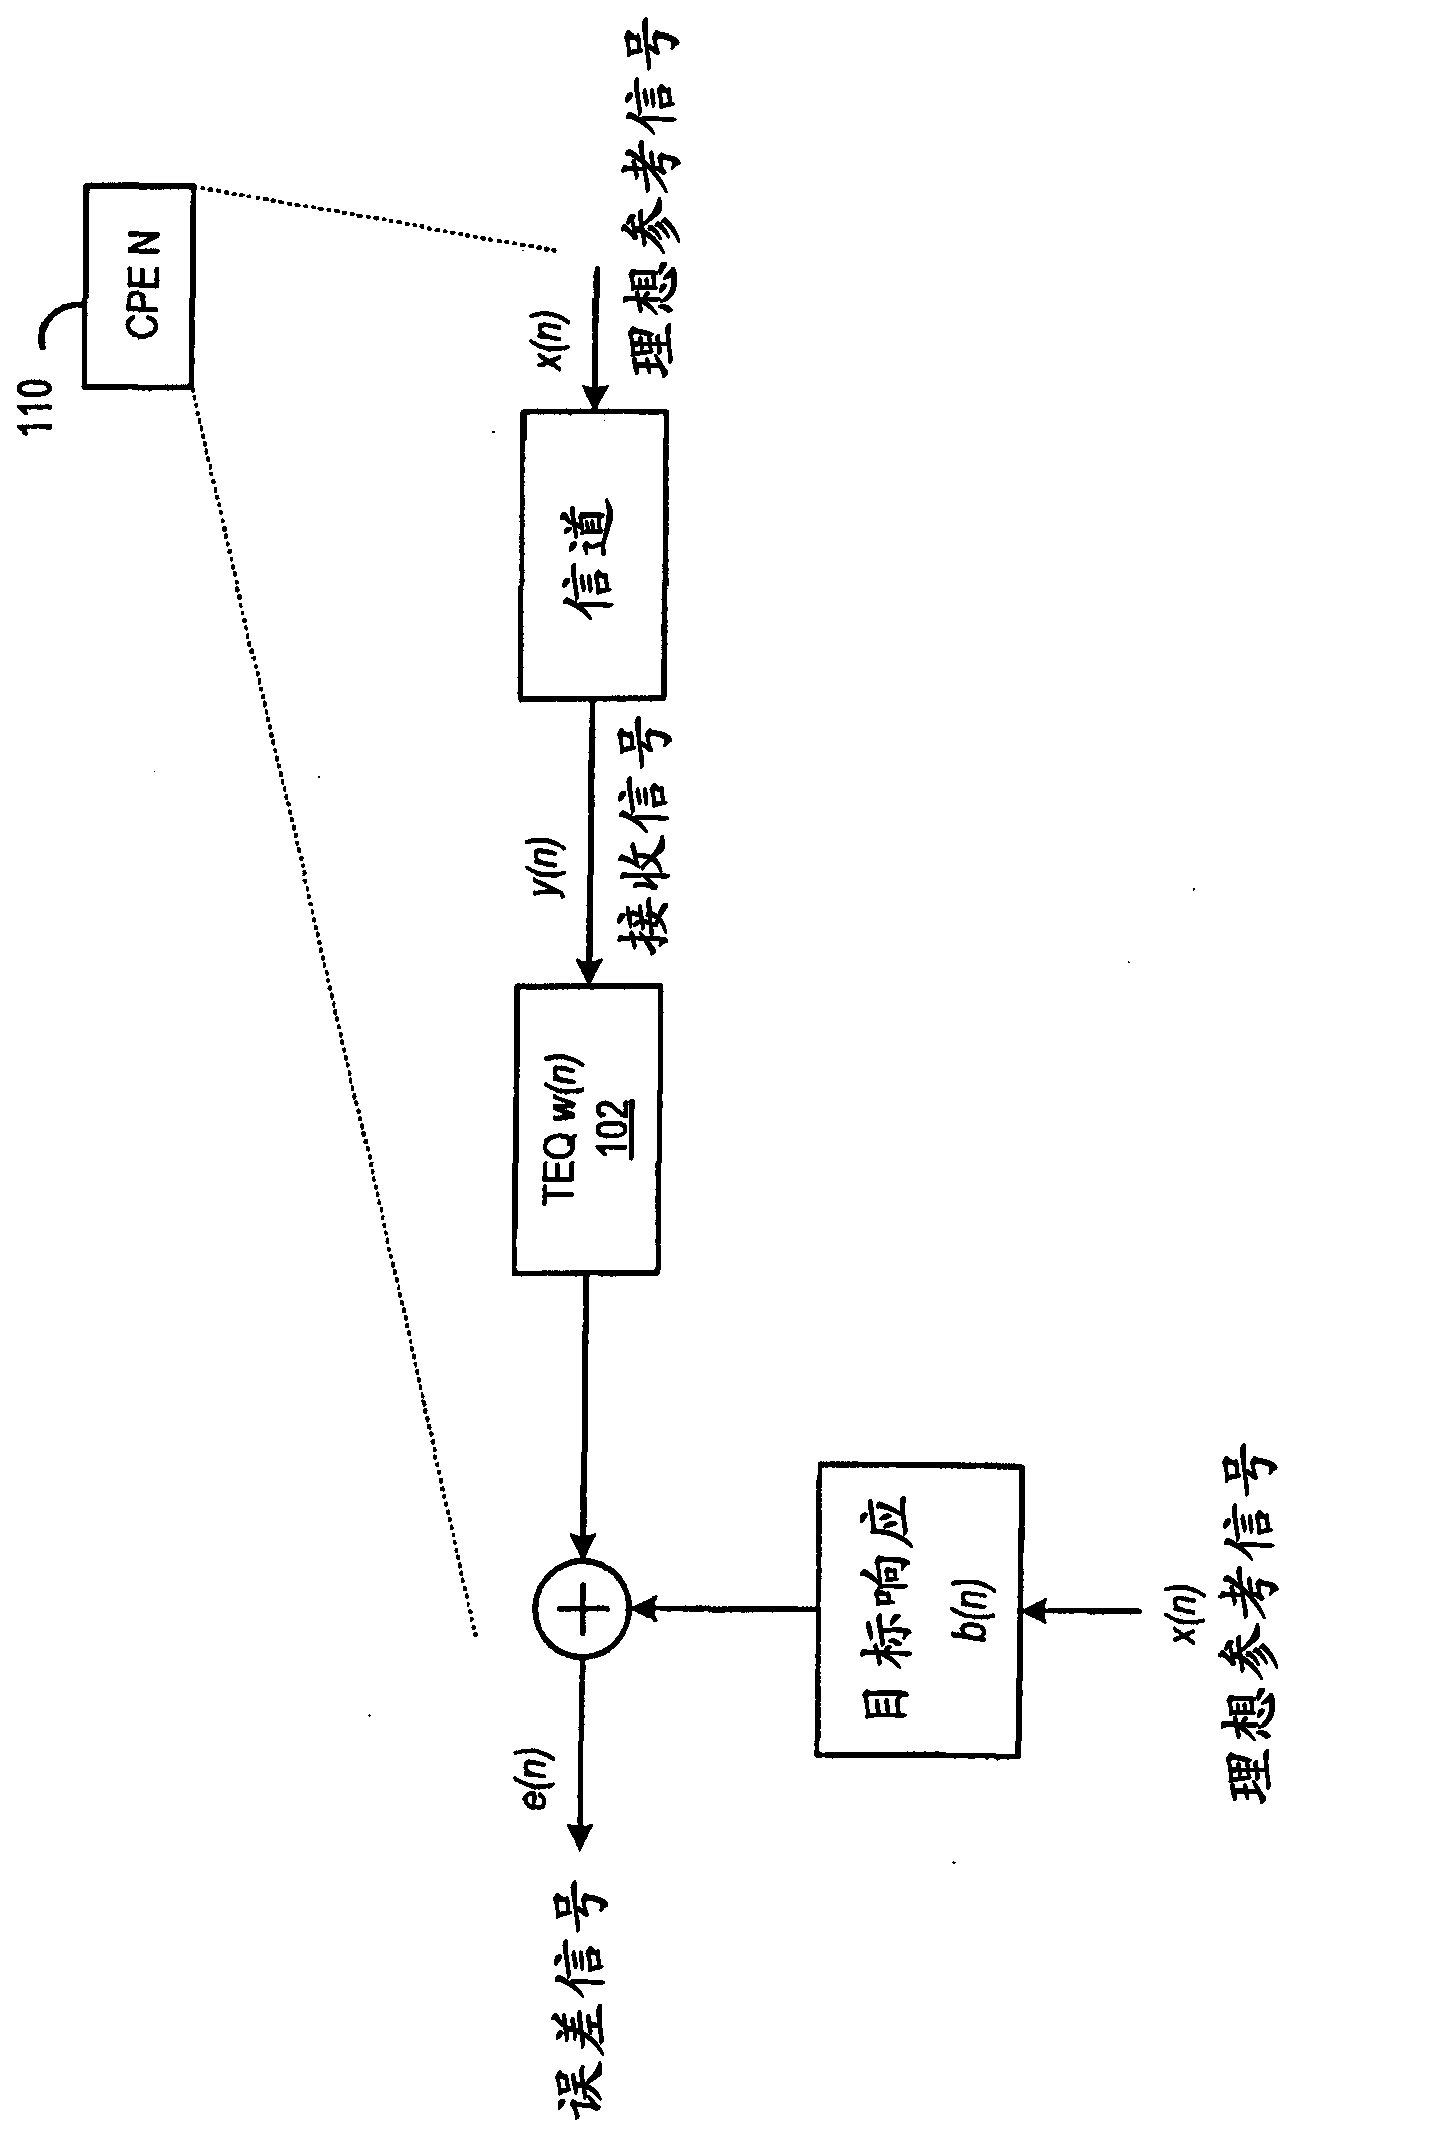 Systems and methods for frequency domain realization of non-integer fractionally spaced time domain equalization